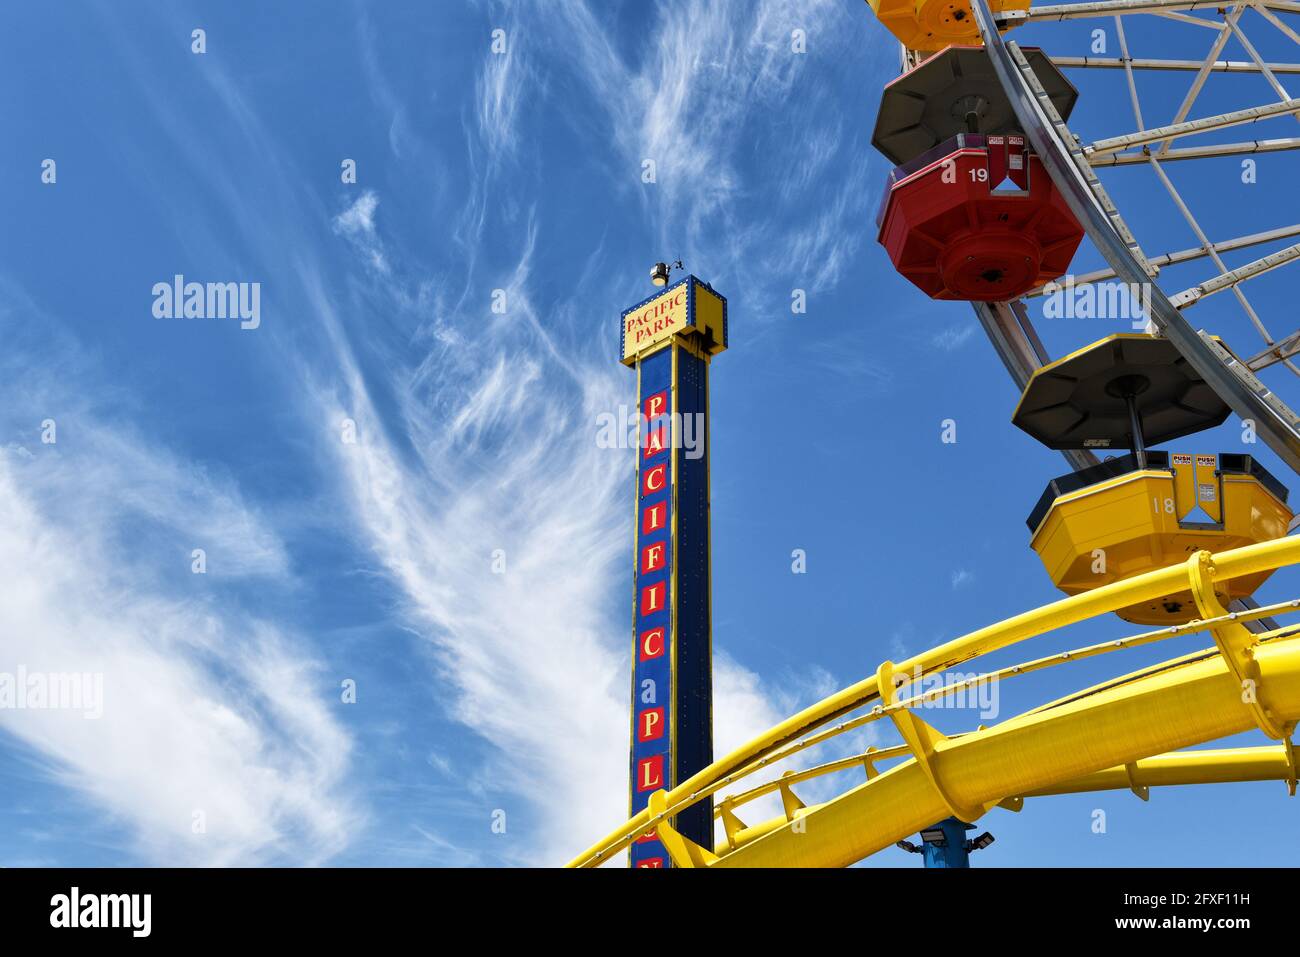 SANTA MONICA, CALIFORNIA - 25 MAY 2021: Closeup of the Ferris Wheel, Roller Coaster and Pacific Plunge rides at Pacific Park onthe Santa Monica Pier. Stock Photo